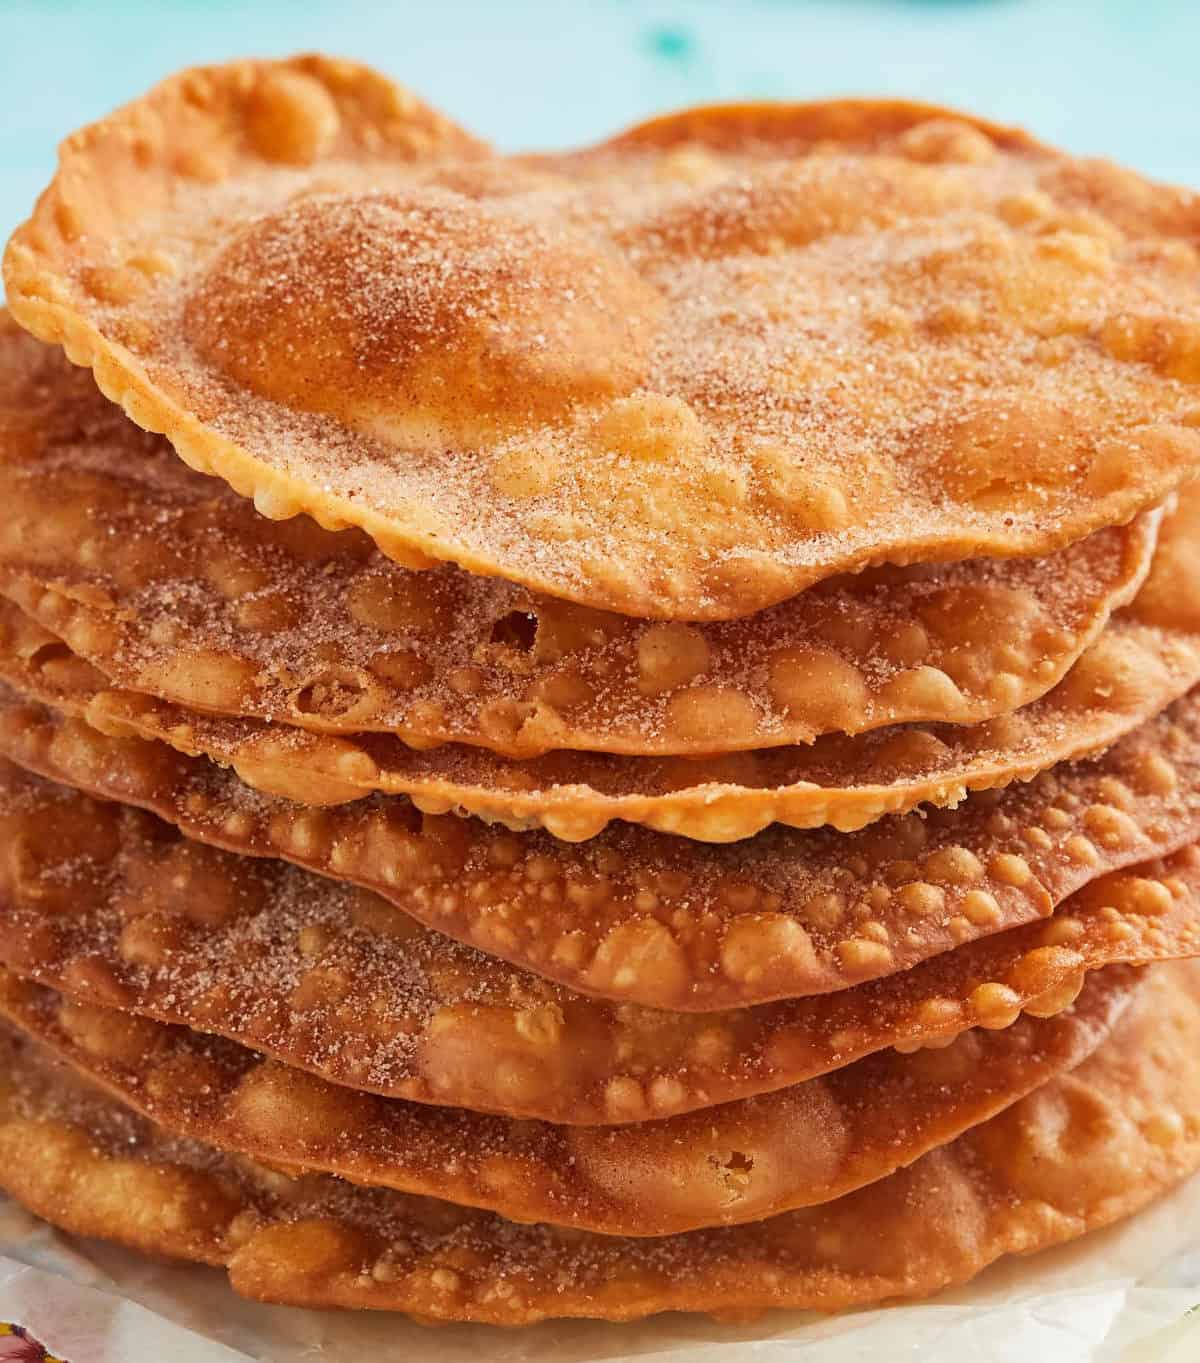  Don't let their simple appearance fool you – these bunuelos are a delicious treat.